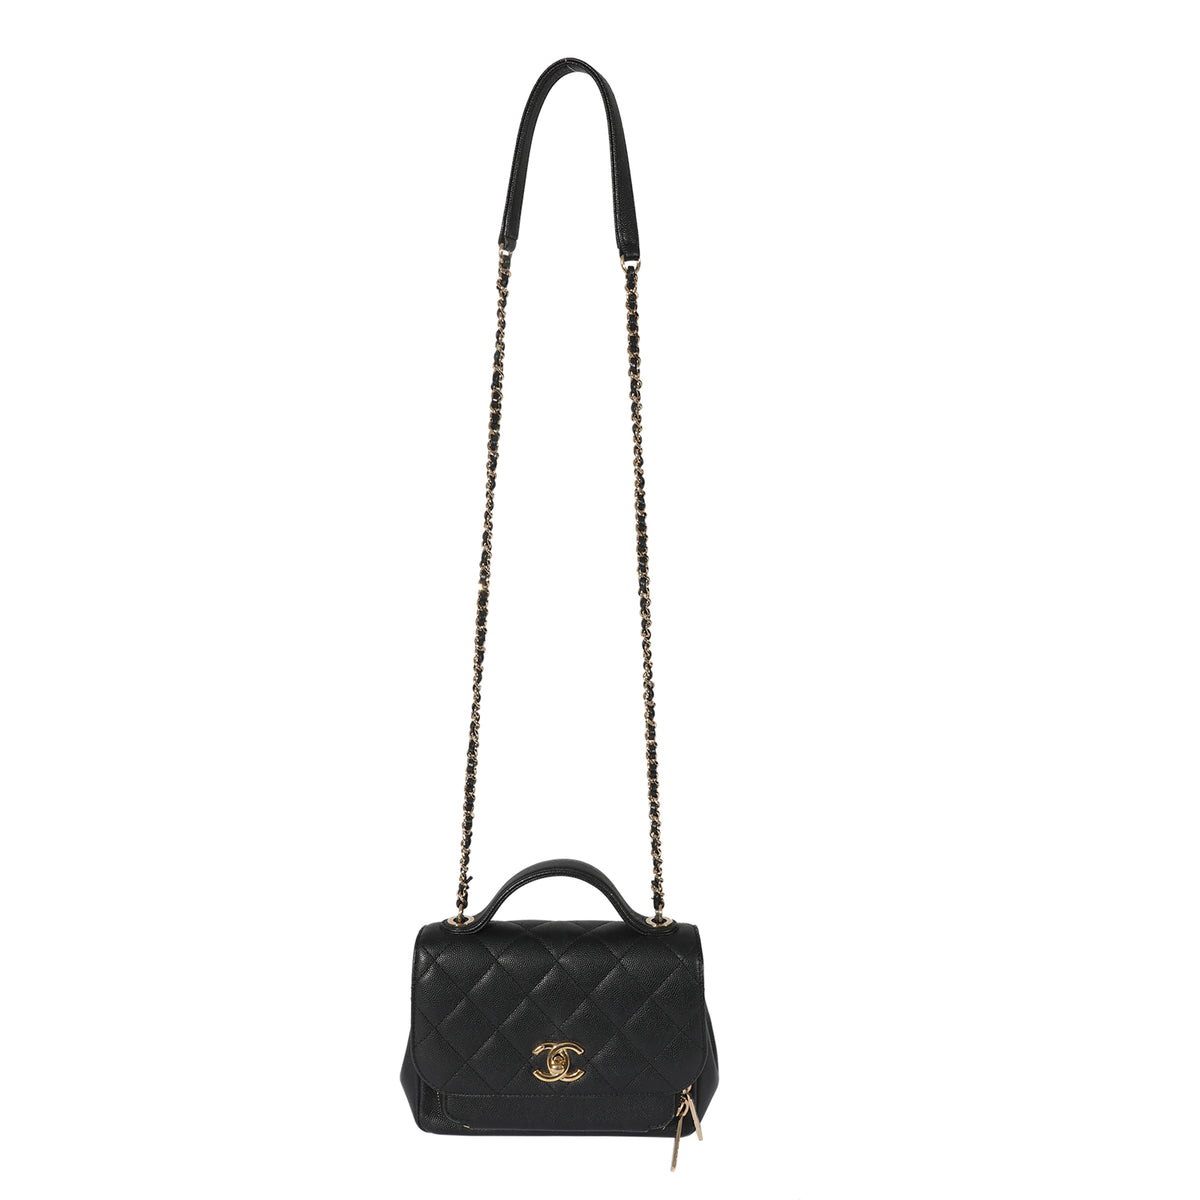 Chanel Black Small Business Affinity Flap Bag